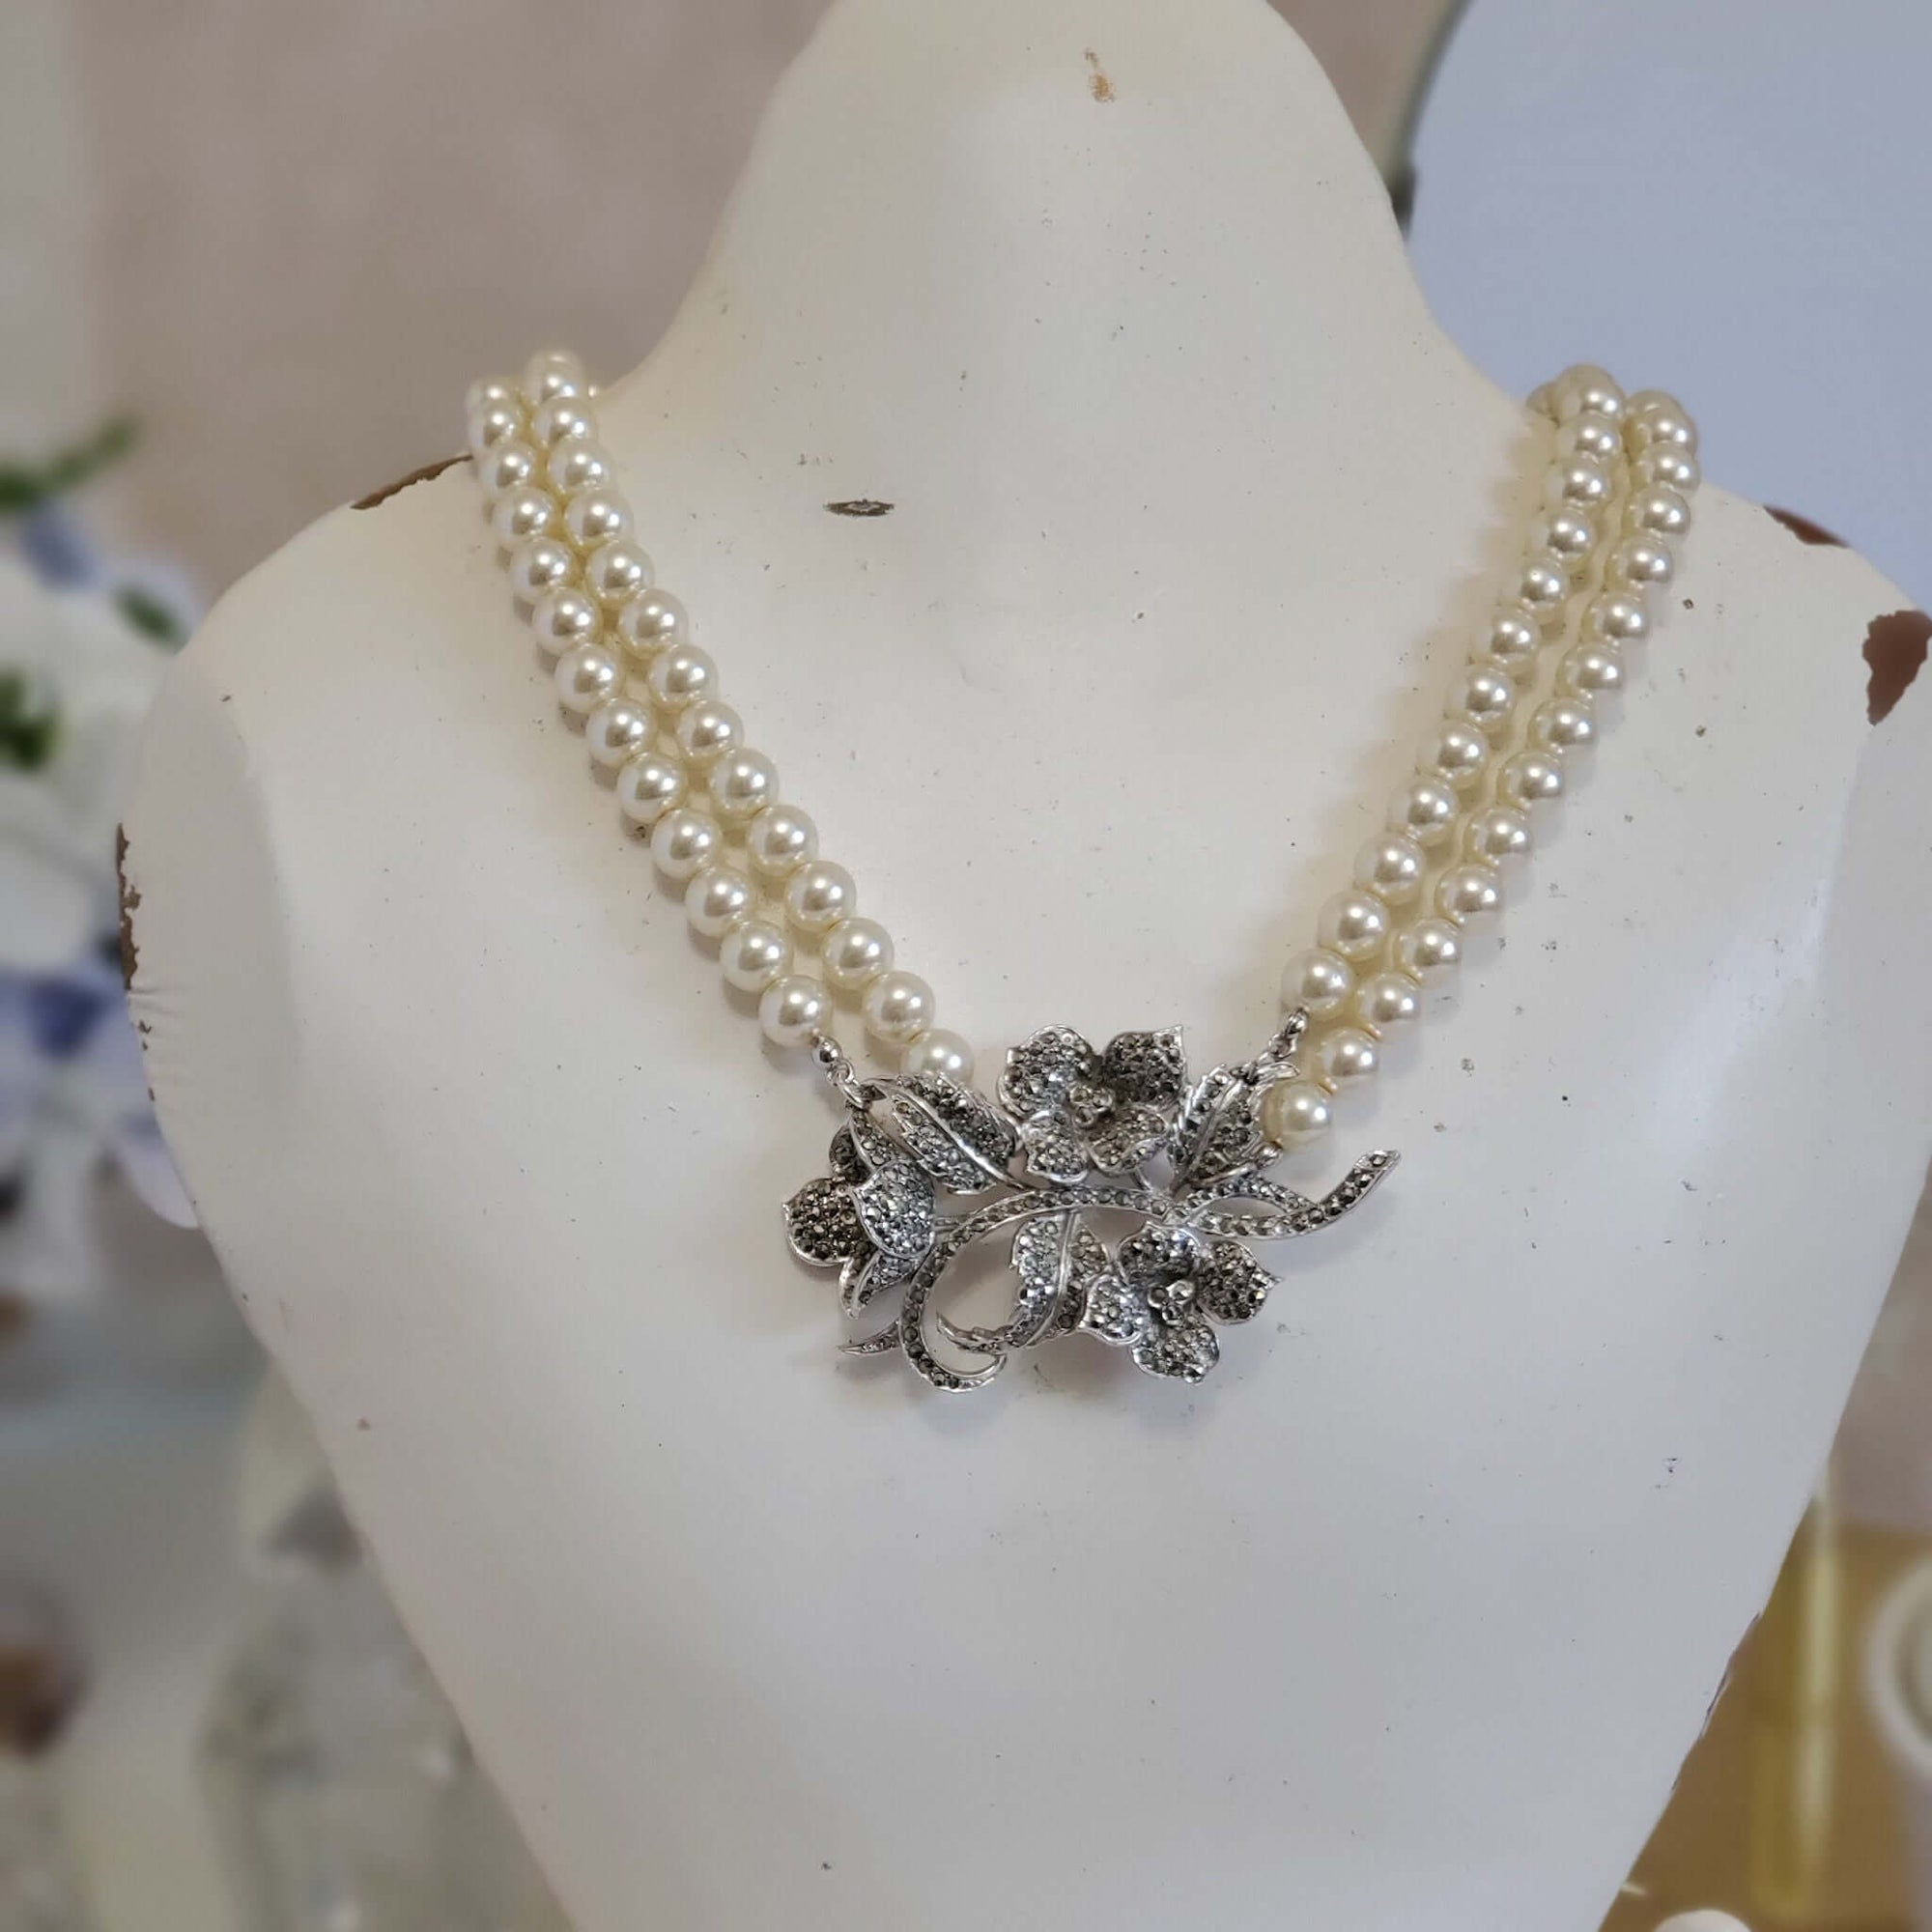 Repurposed Pearl Necklace with Floral Pendant